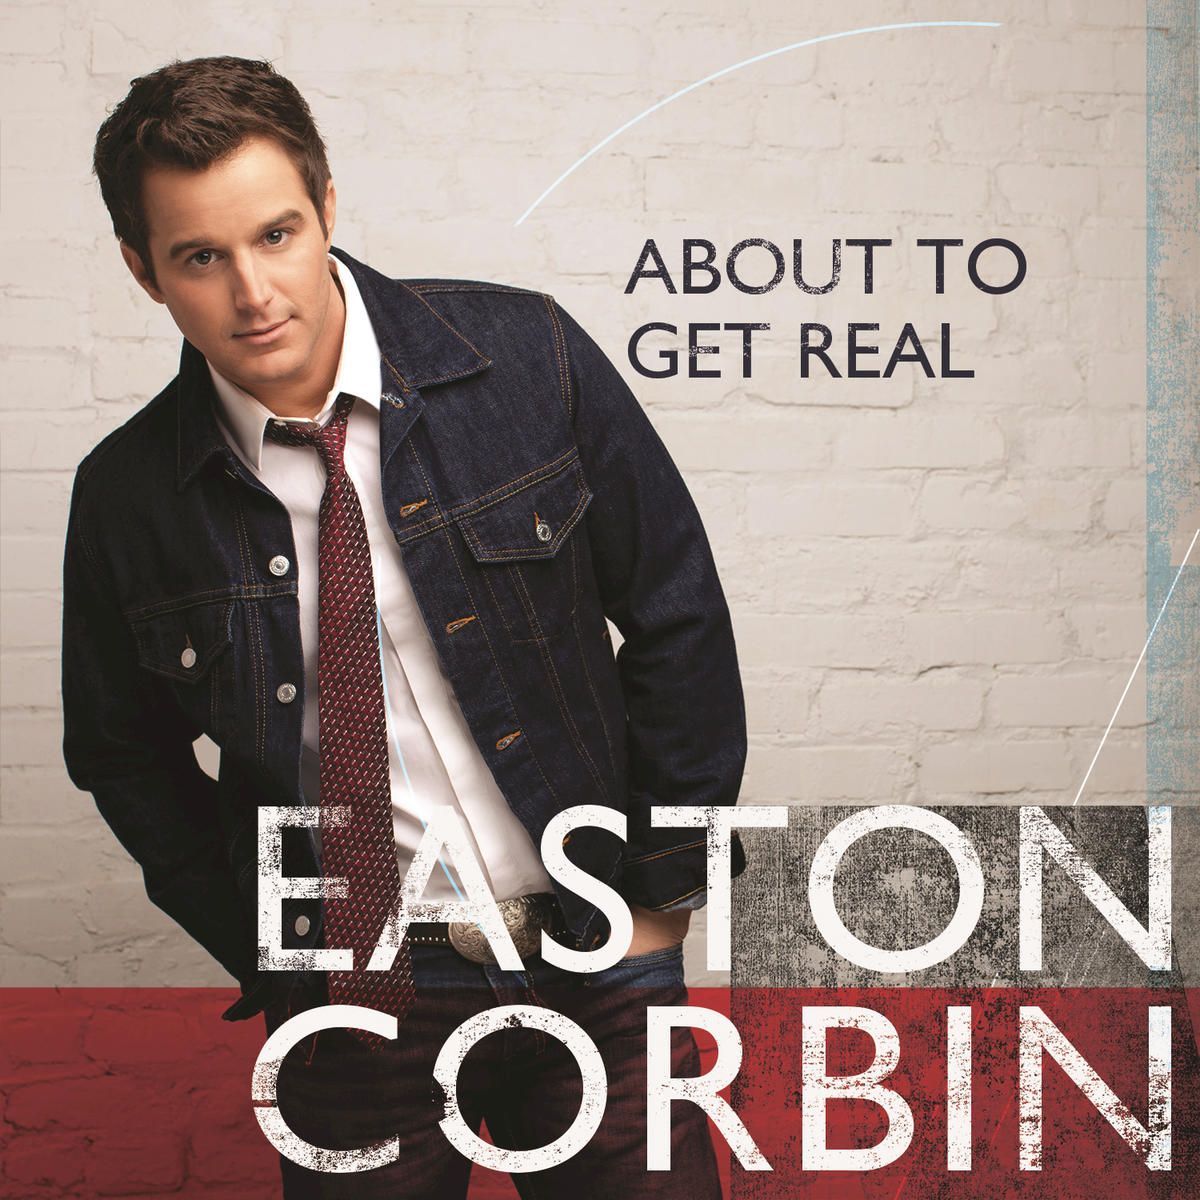 EASTON CORBIN’S ABOUT TO GET REAL DEBUTS NO. 1  ON BILLBOARD COUNTRY ALBUMS CHART